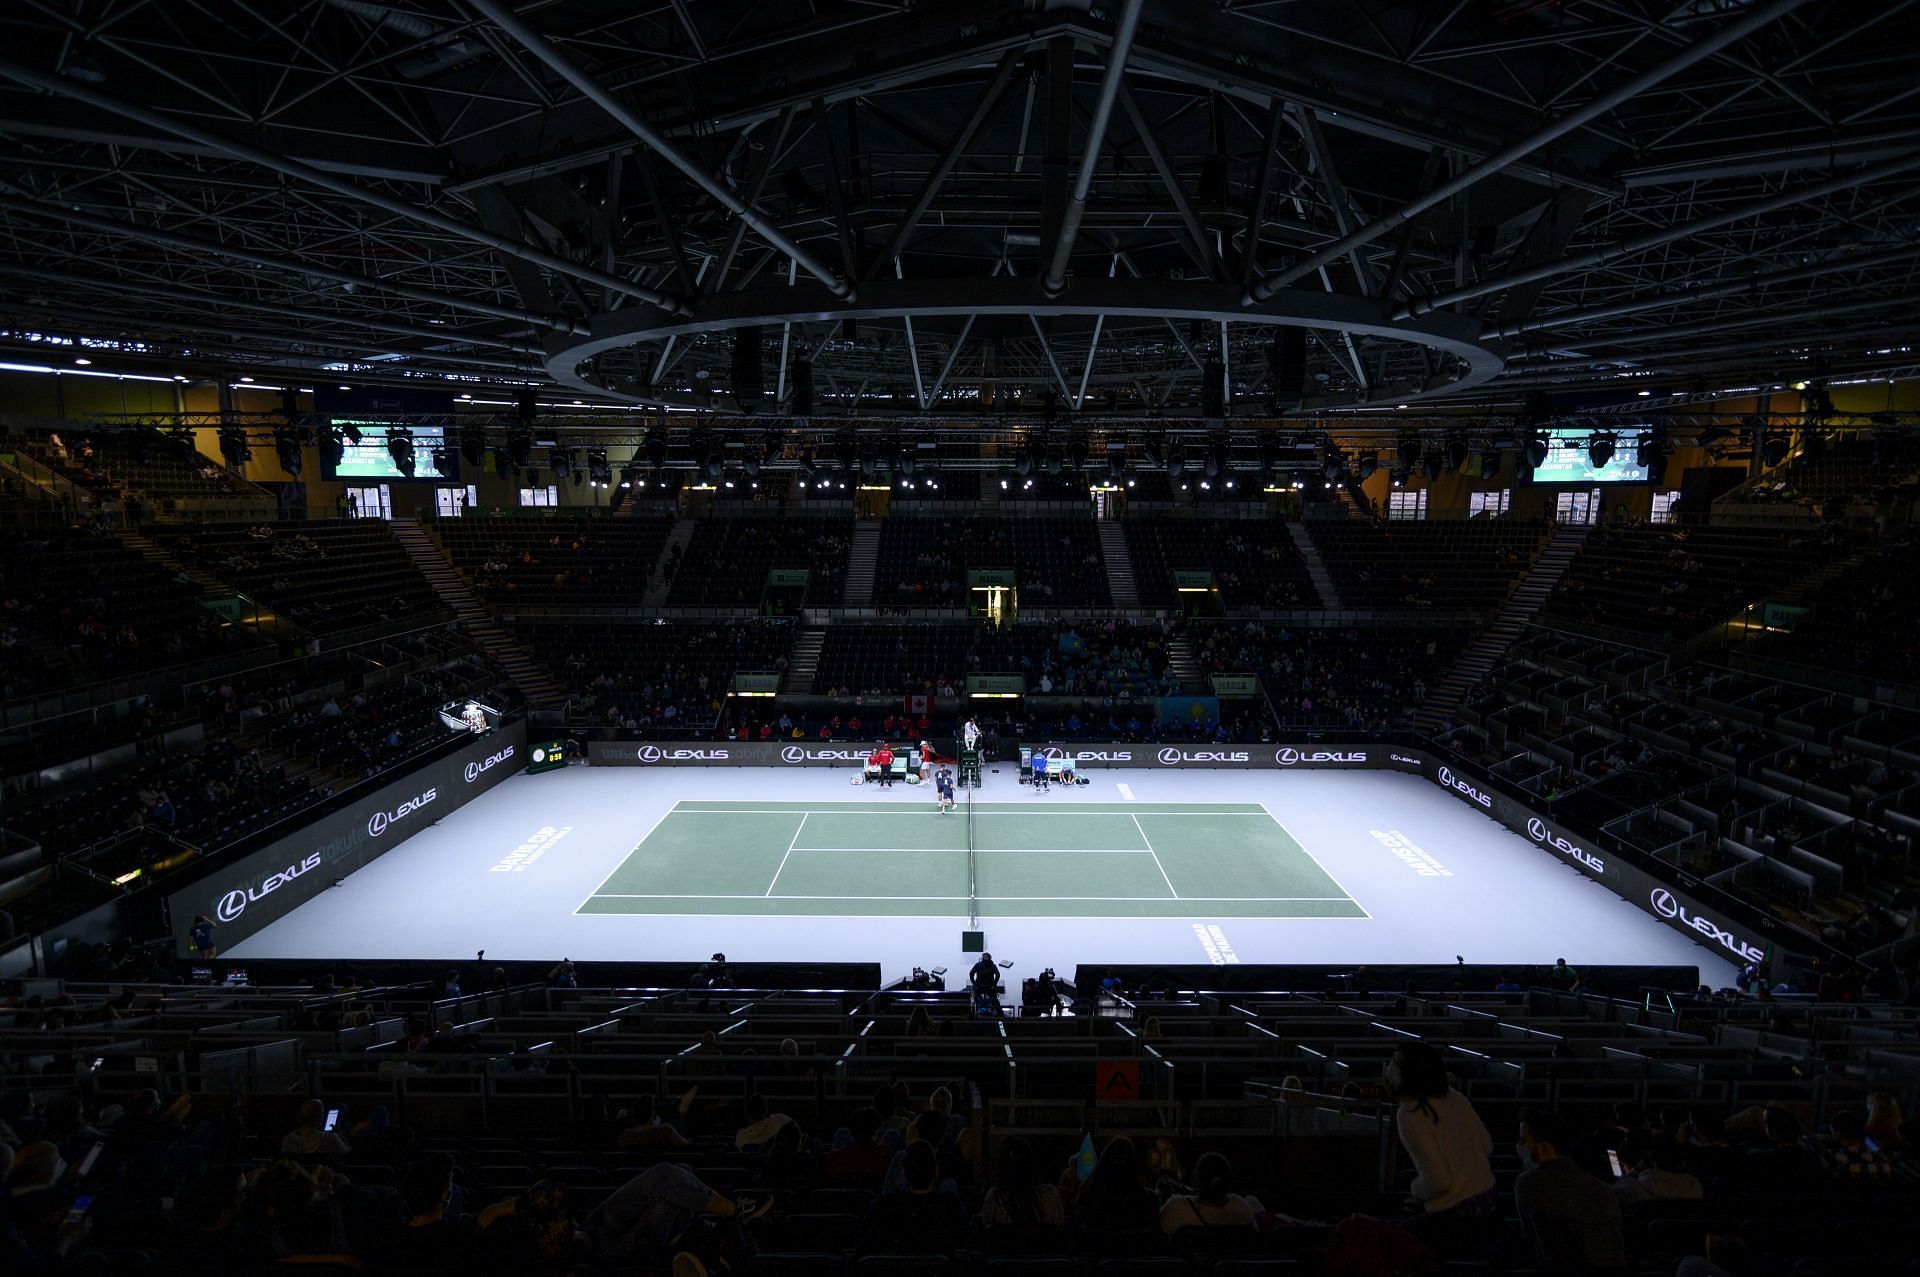 The Madrid Arena pavilion at the 2021 Davis Cup Finals